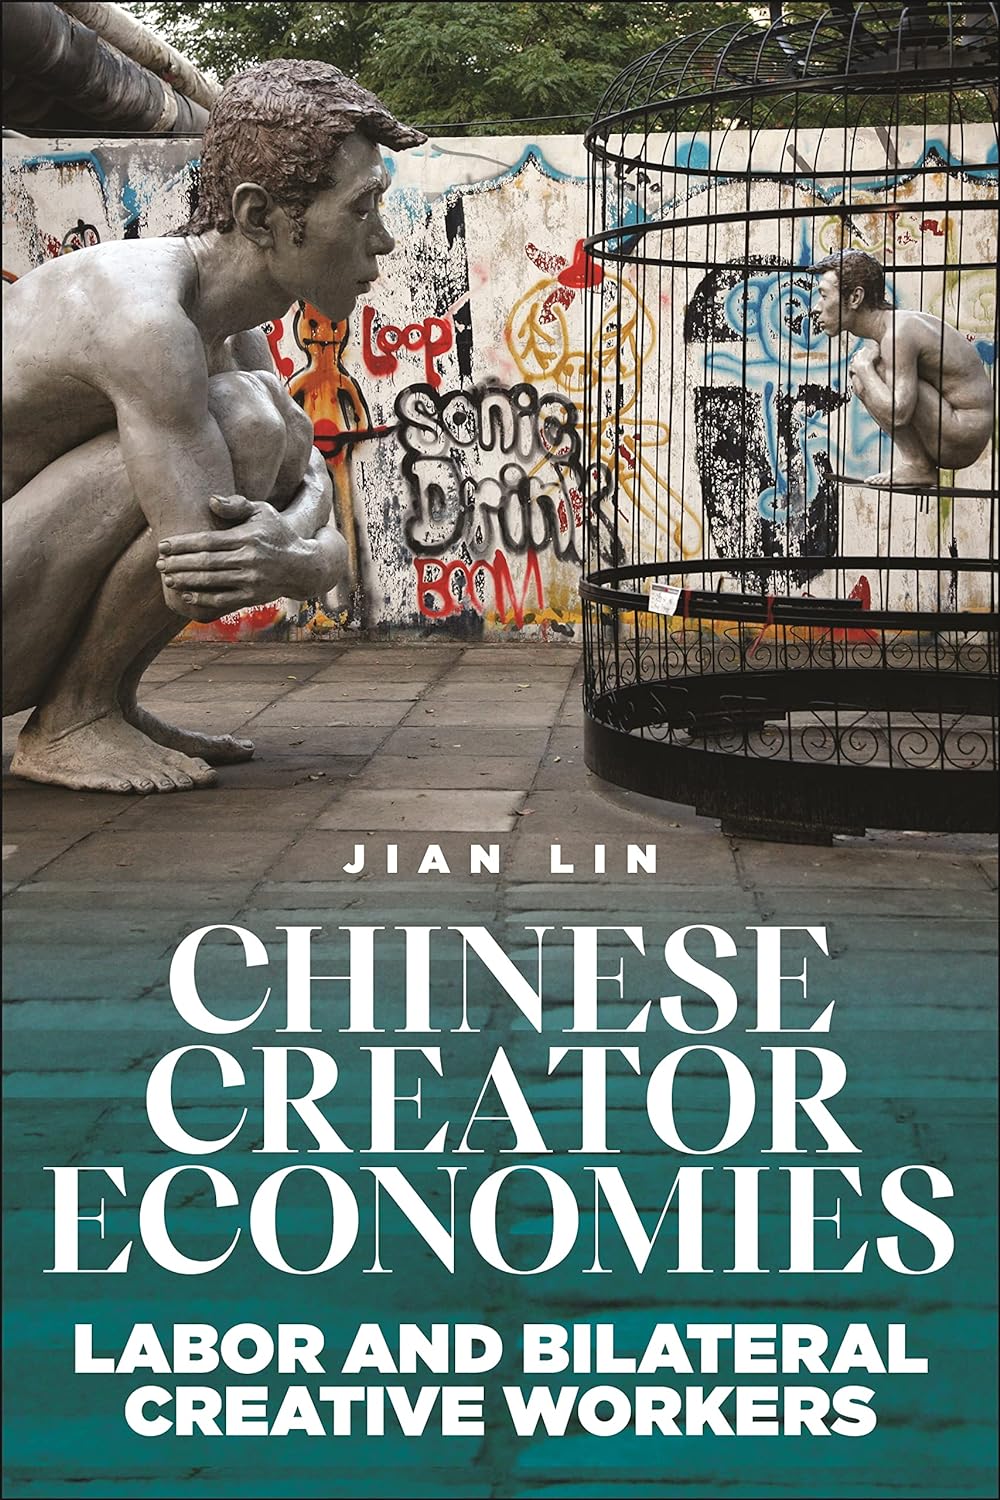 Precarious Creativity and the State in New Era China - Review of Chinese Creator Economies: Labor and Bilateral Creative Workers by Jian Lin, New York University Press, 2023